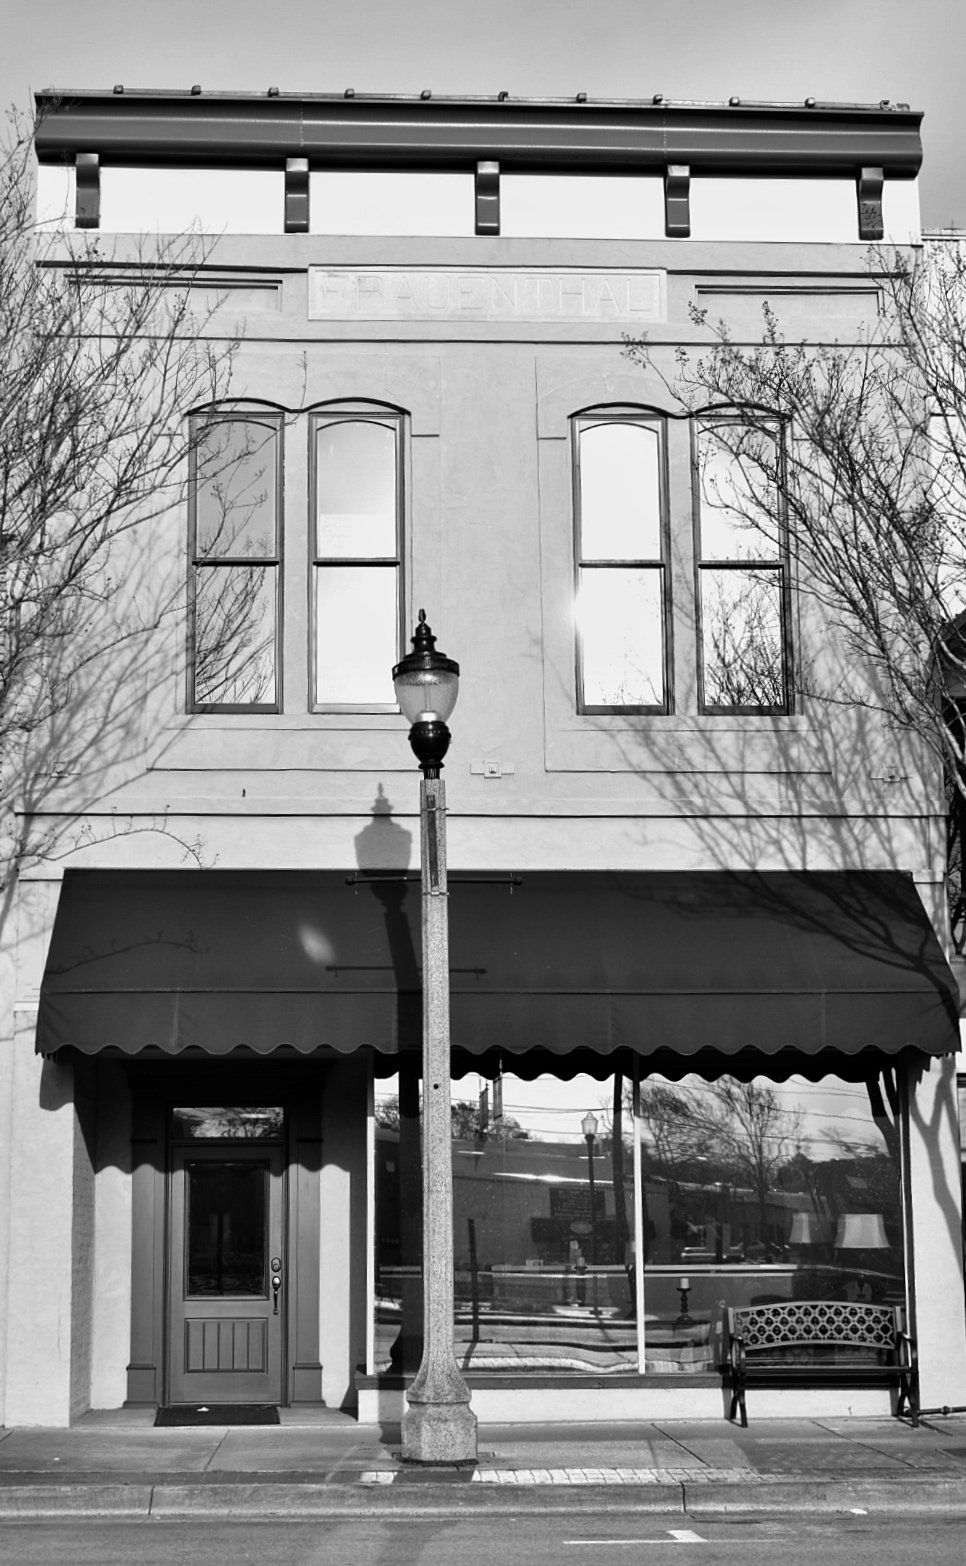 photo of the jiles firm building in downtown conway arkansas